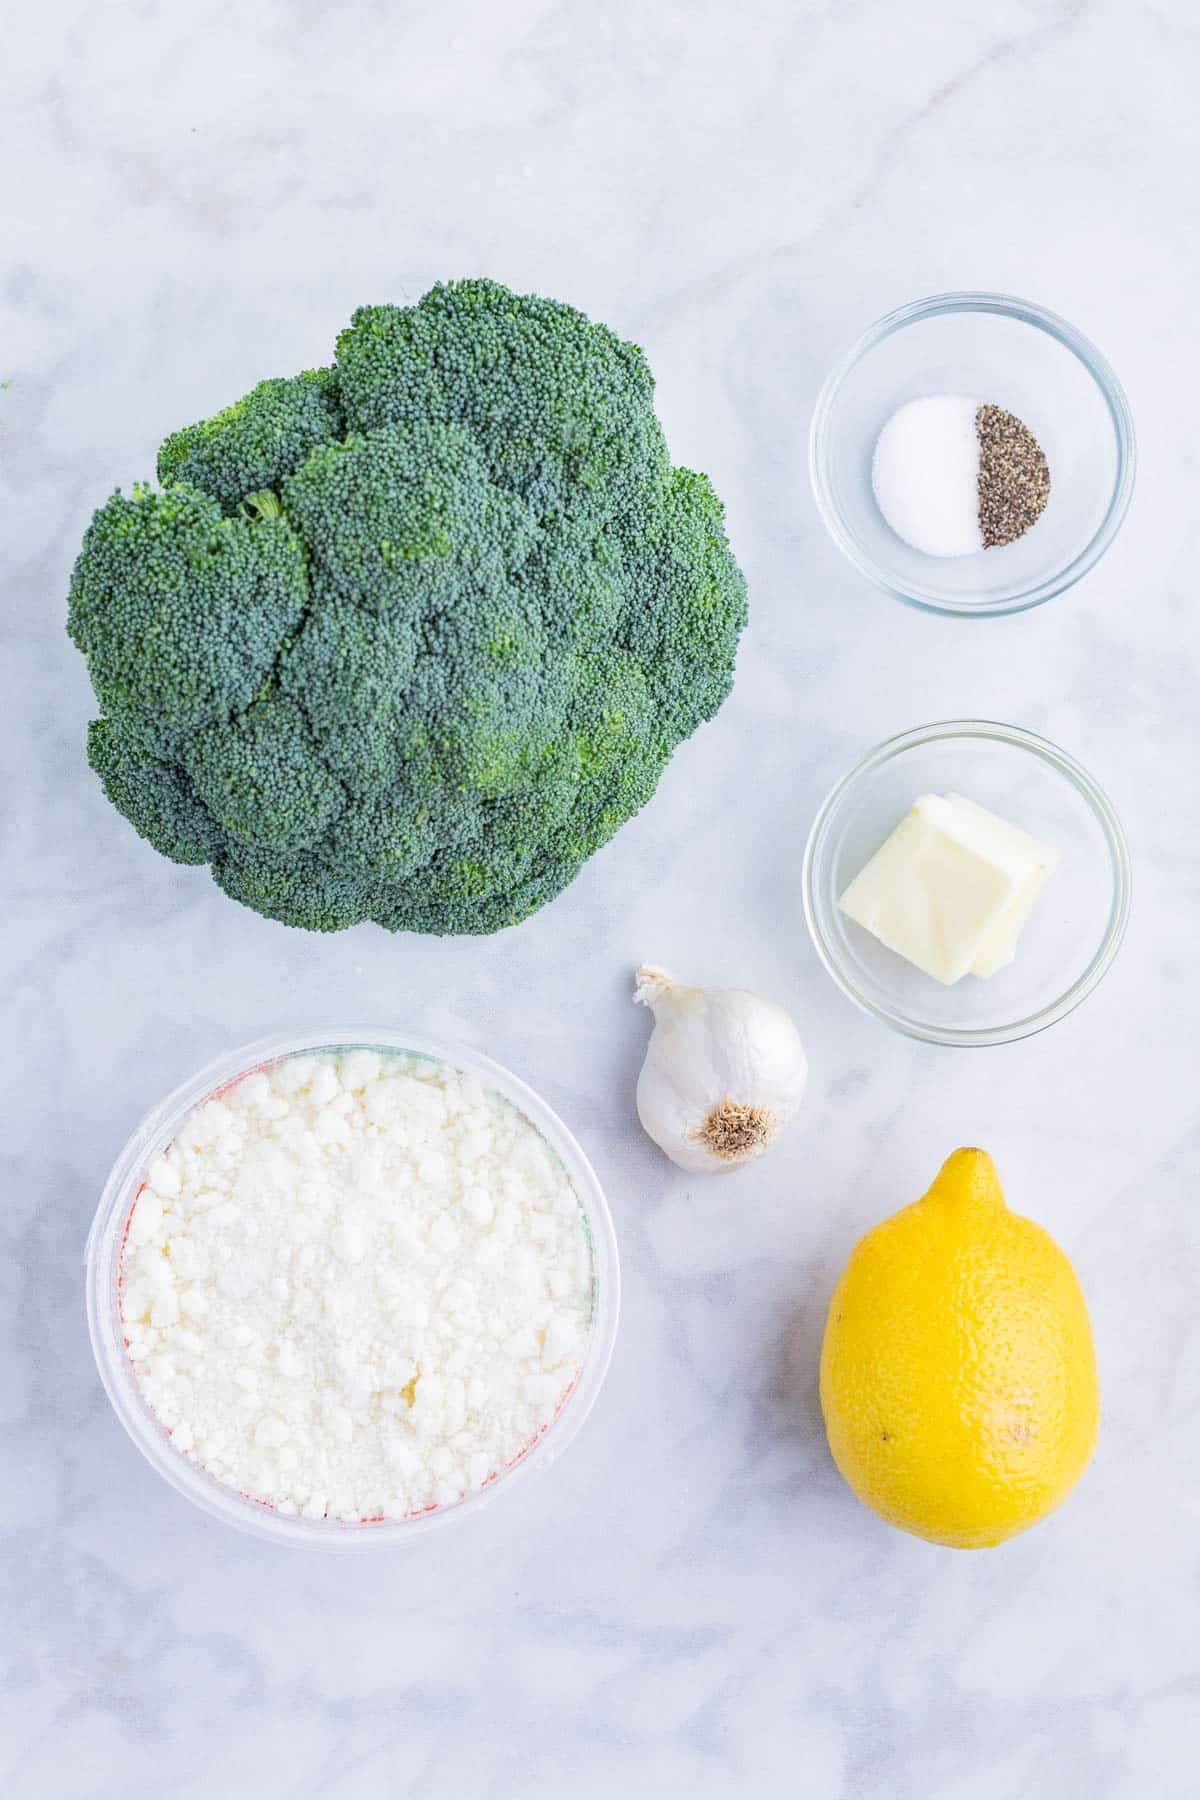 Broccoli, lemon, salt, pepper, garlic, butter, and Parmesan cheese are the ingredients for this dish.